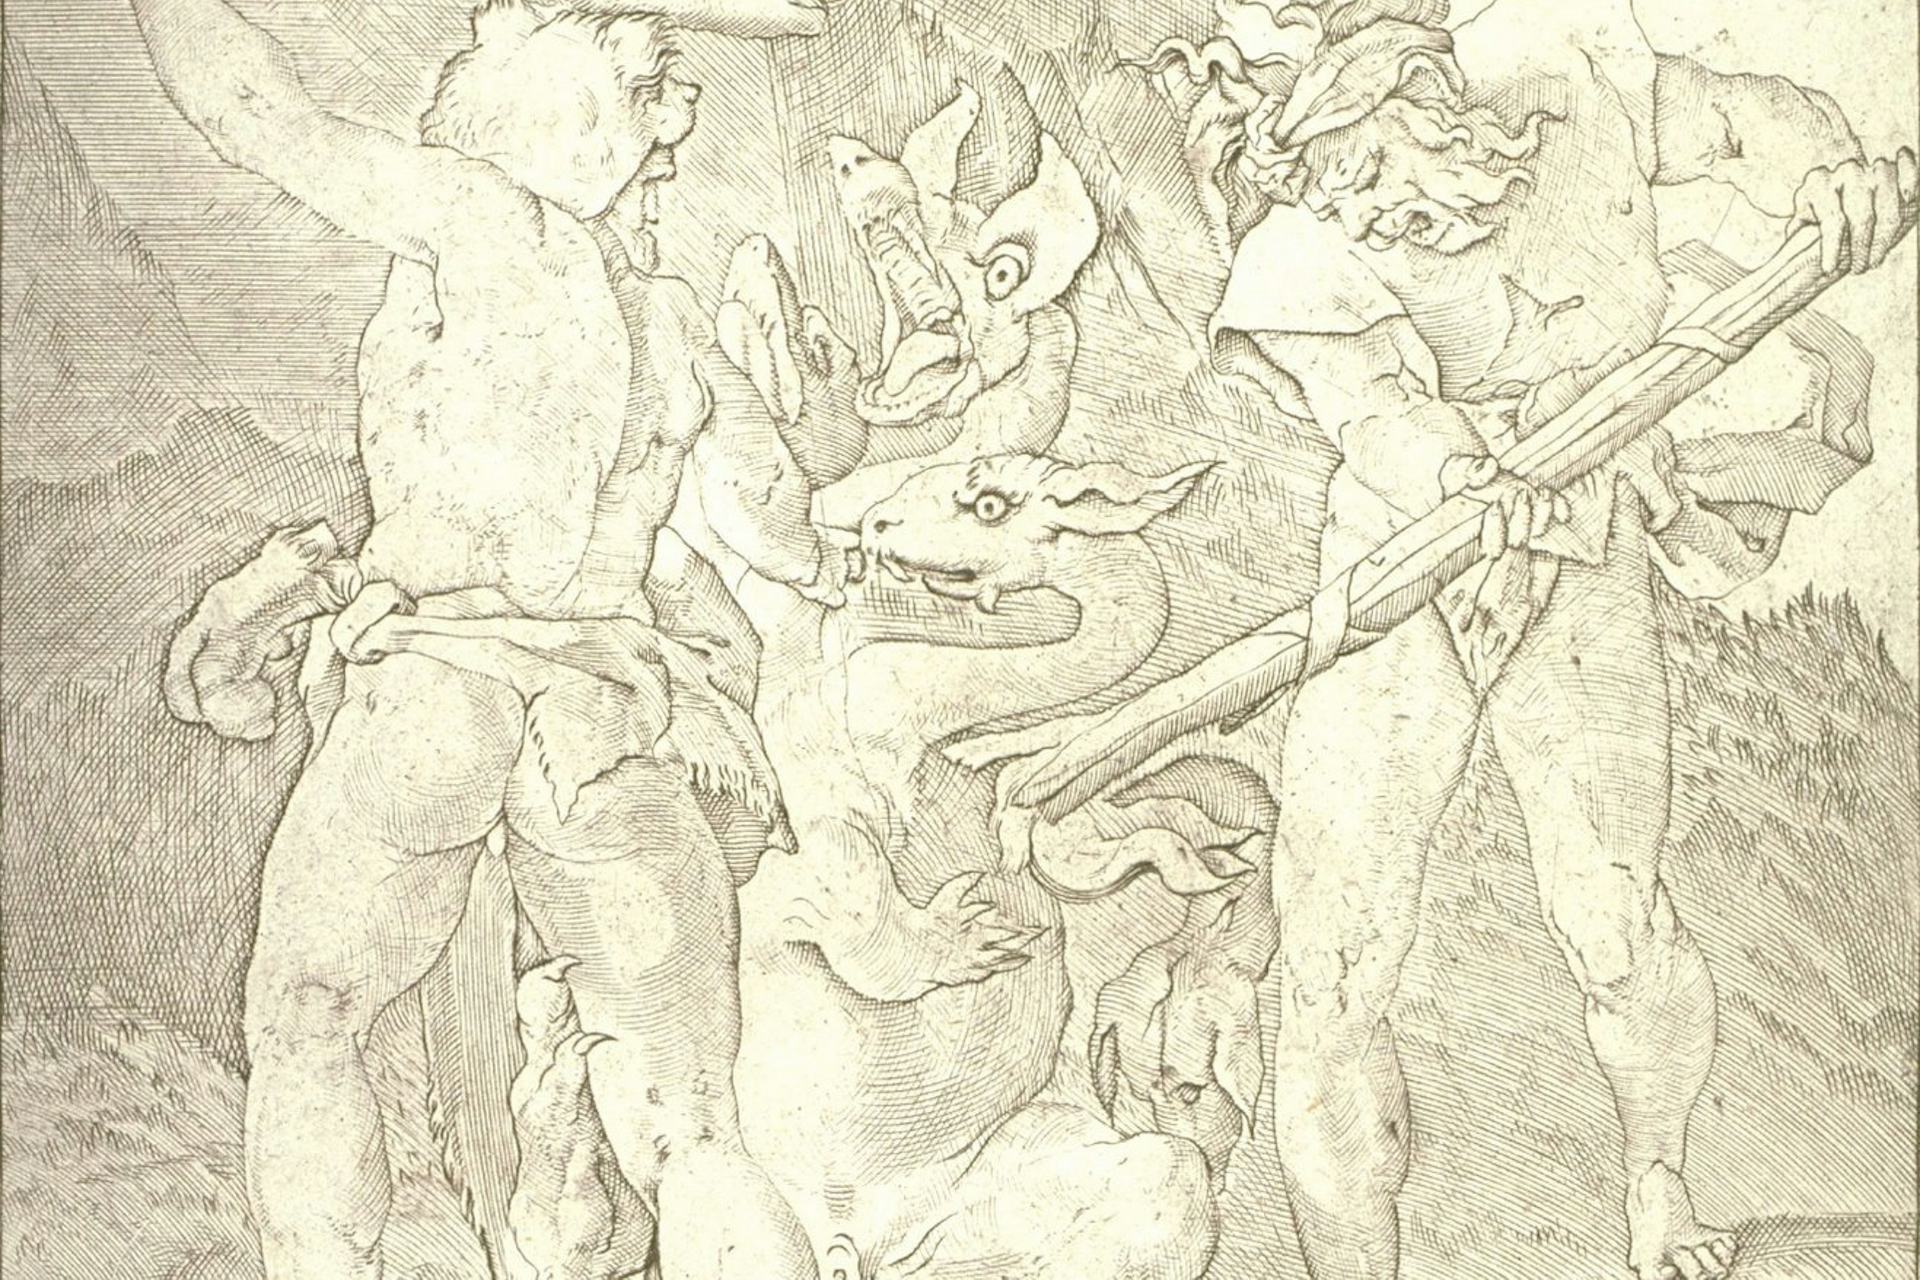 Engraving of the second labor of Heracles by Giovanni Jacopo Caraglio